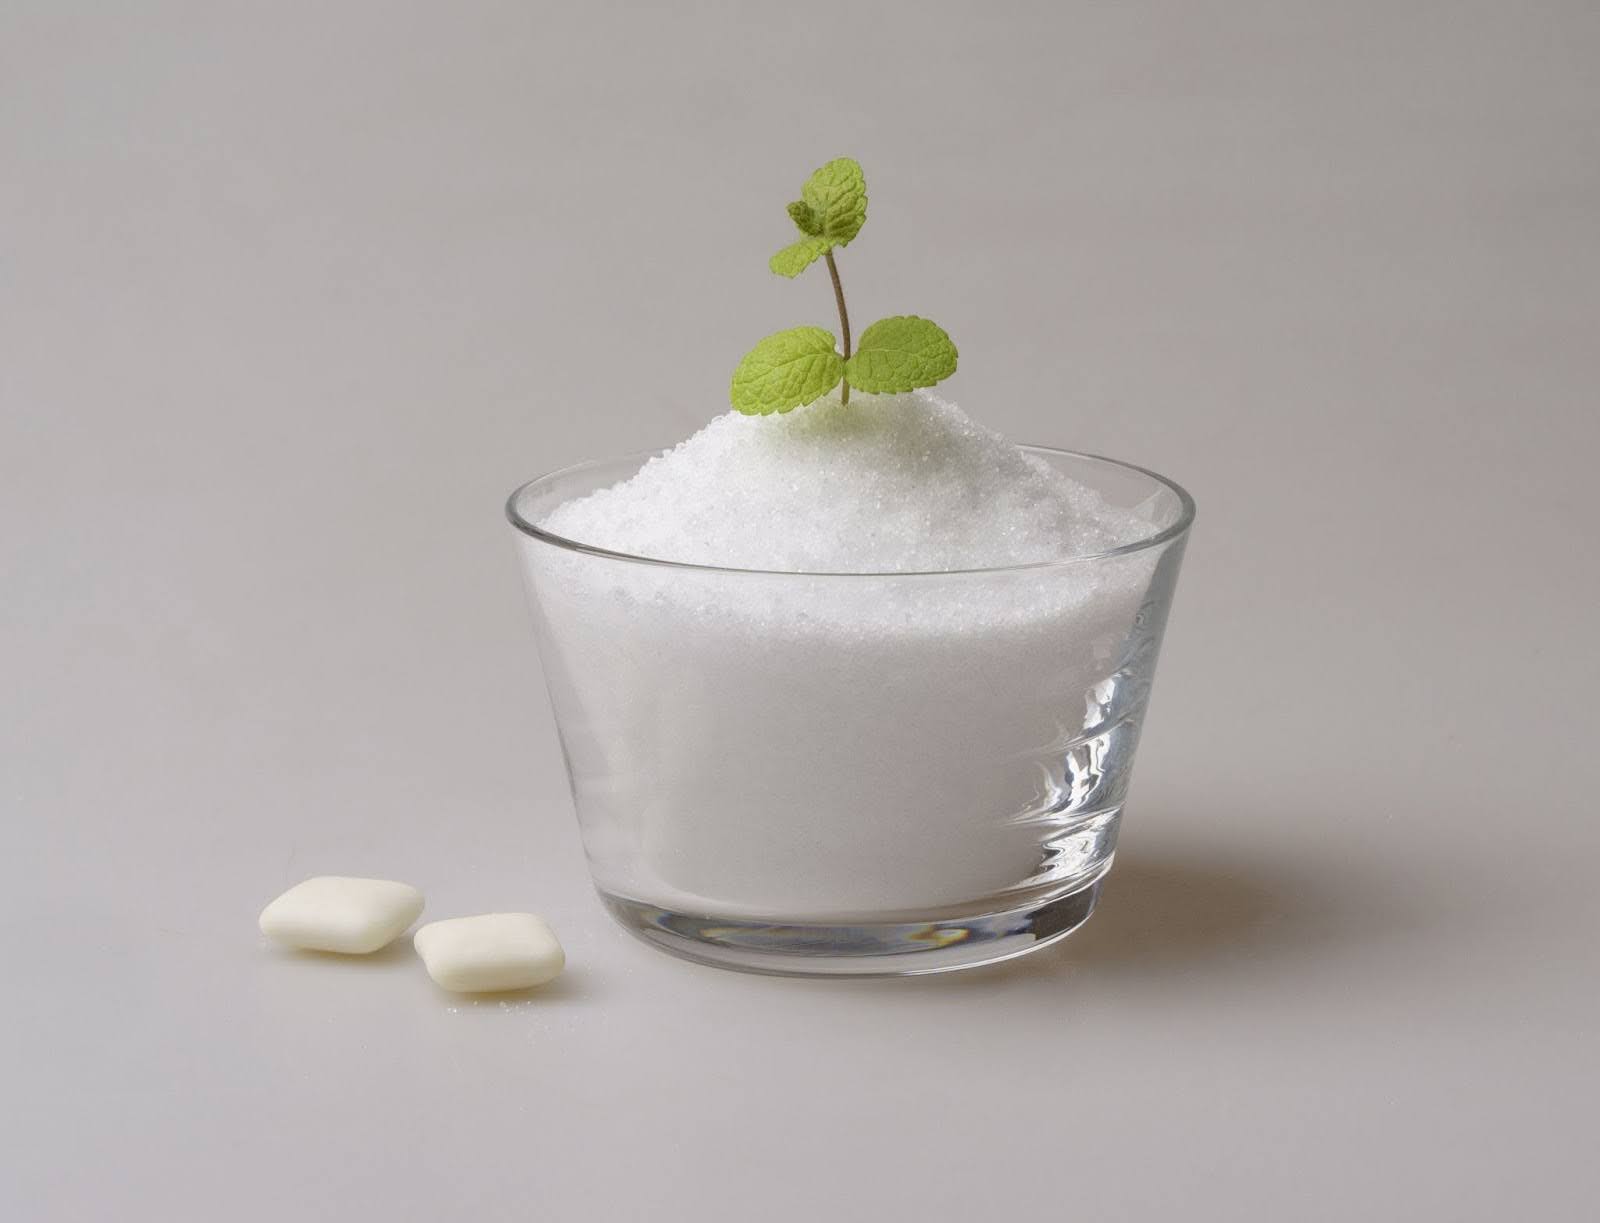 Xylitol as an alternative for sugar